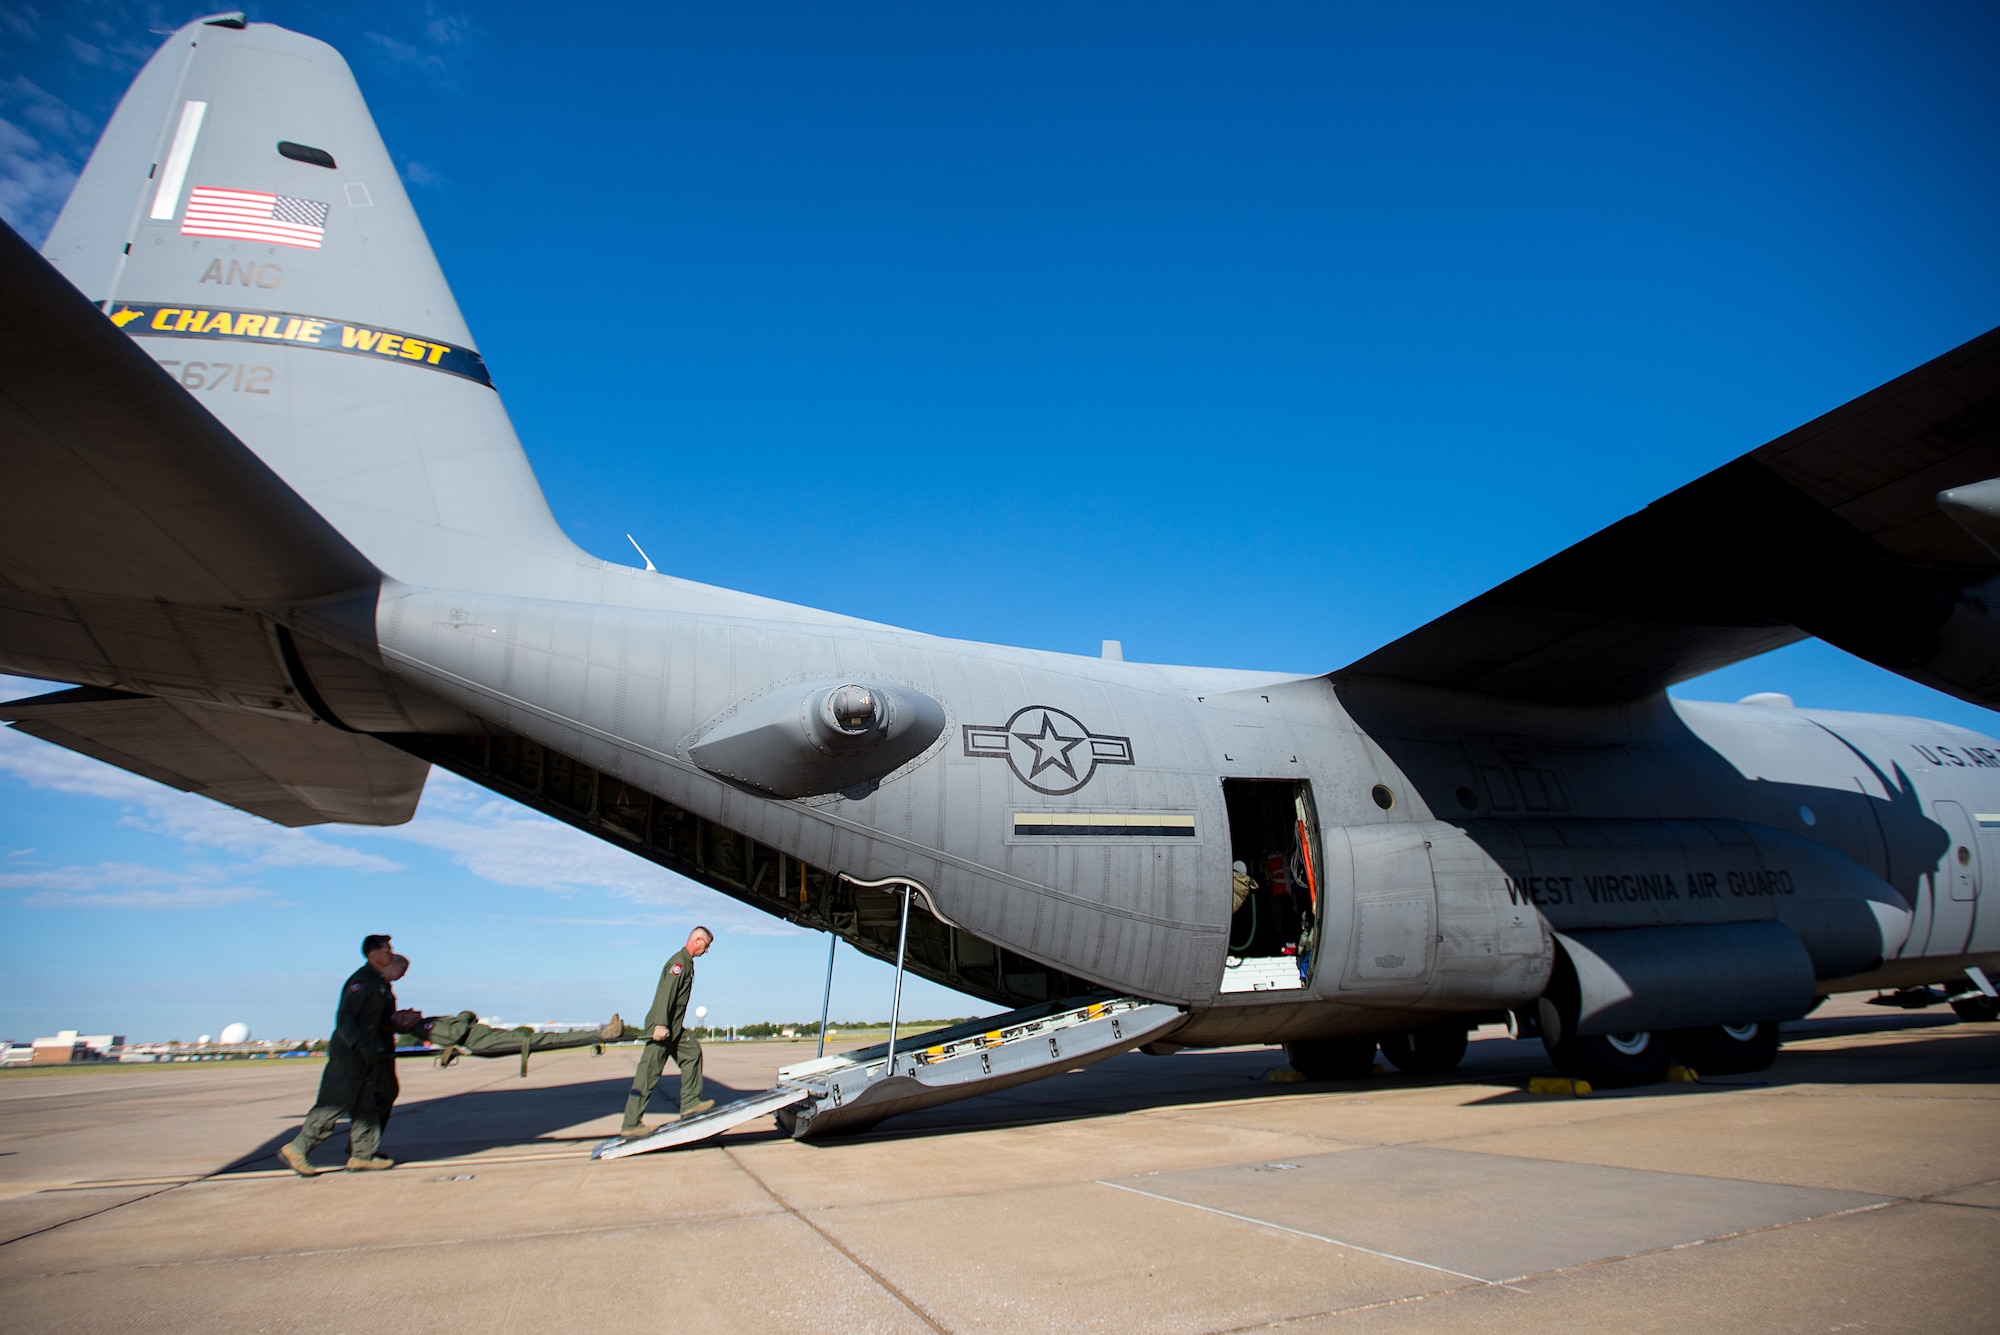 Airmen of 137th Aeromedical Evacuation Squadron, Oklahoma Air National Guard, load medical supplies and simulated patients onto a C-130 Hercules flown by the 130th Airlift Wing, West Virginia ANG, as part of a joint ANG training mission, Sep. 12, 2015. The training helped 137 AES Airmen experience different airframes and new flight crews while maintaining flight readiness. (U.S. Air National Guard photo by Senior Airman Tyler Woodward/Released)